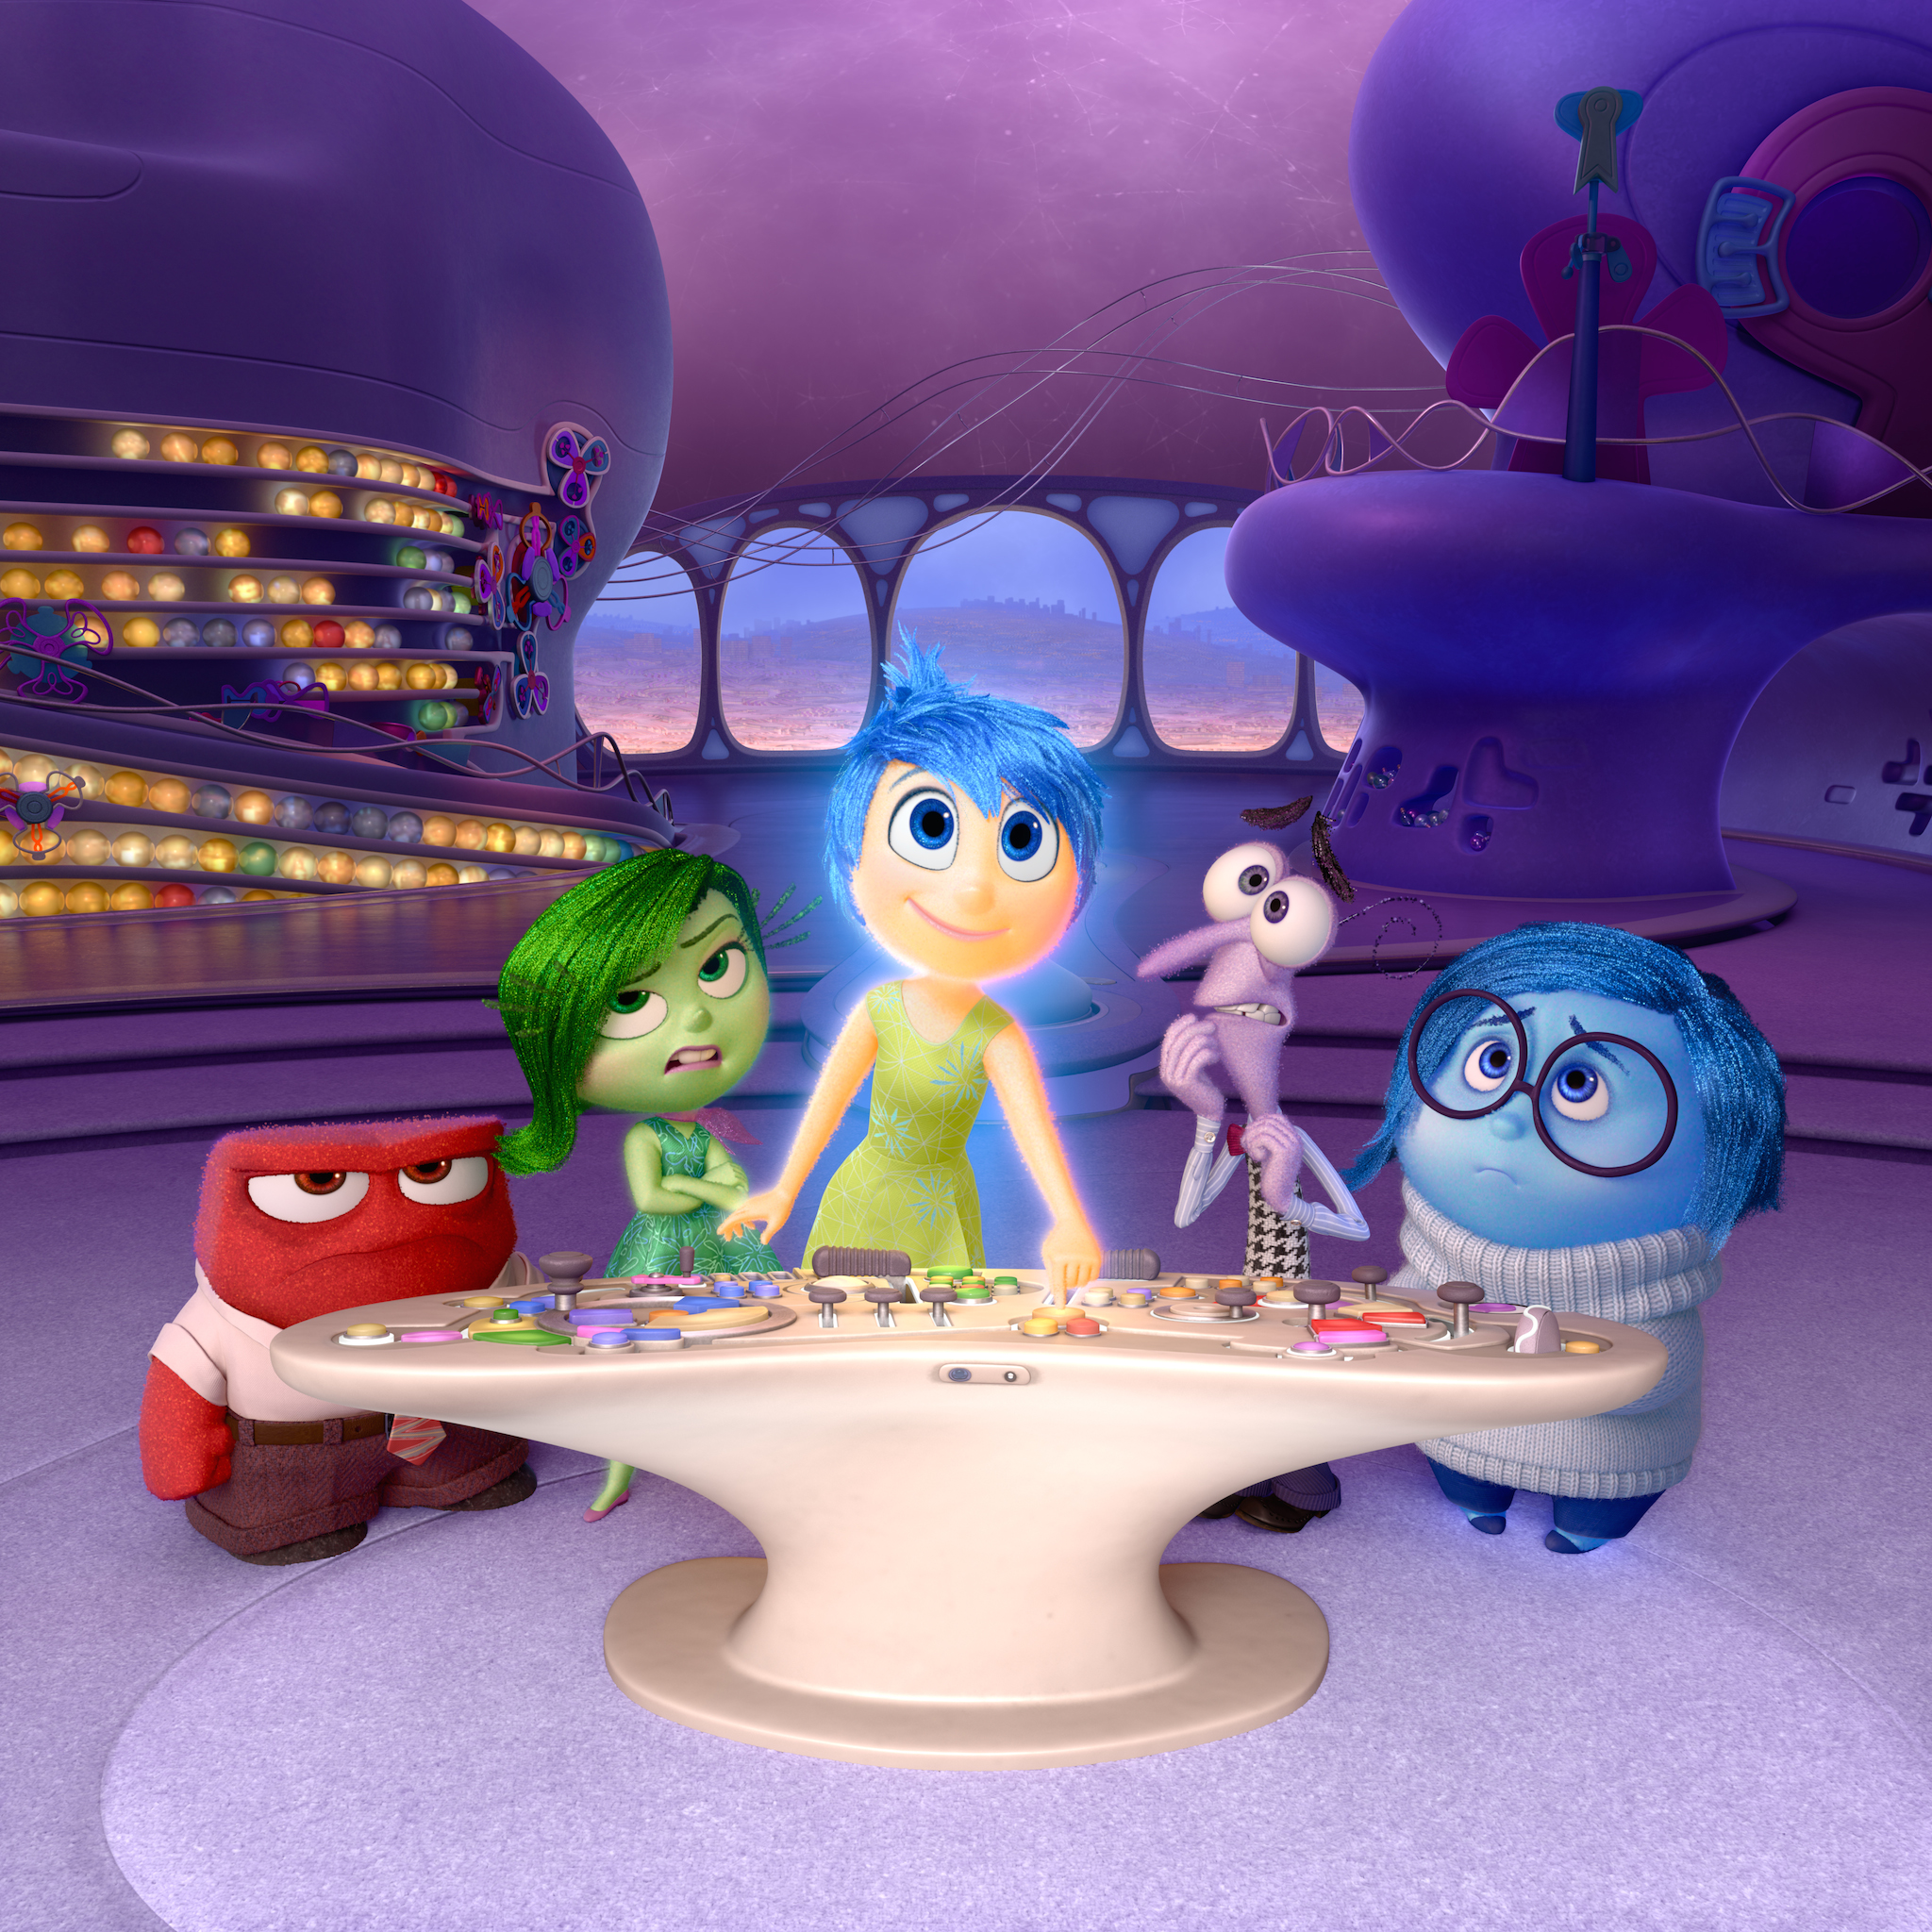 INSIDE OUT is a Return to Excellence for PIXAR